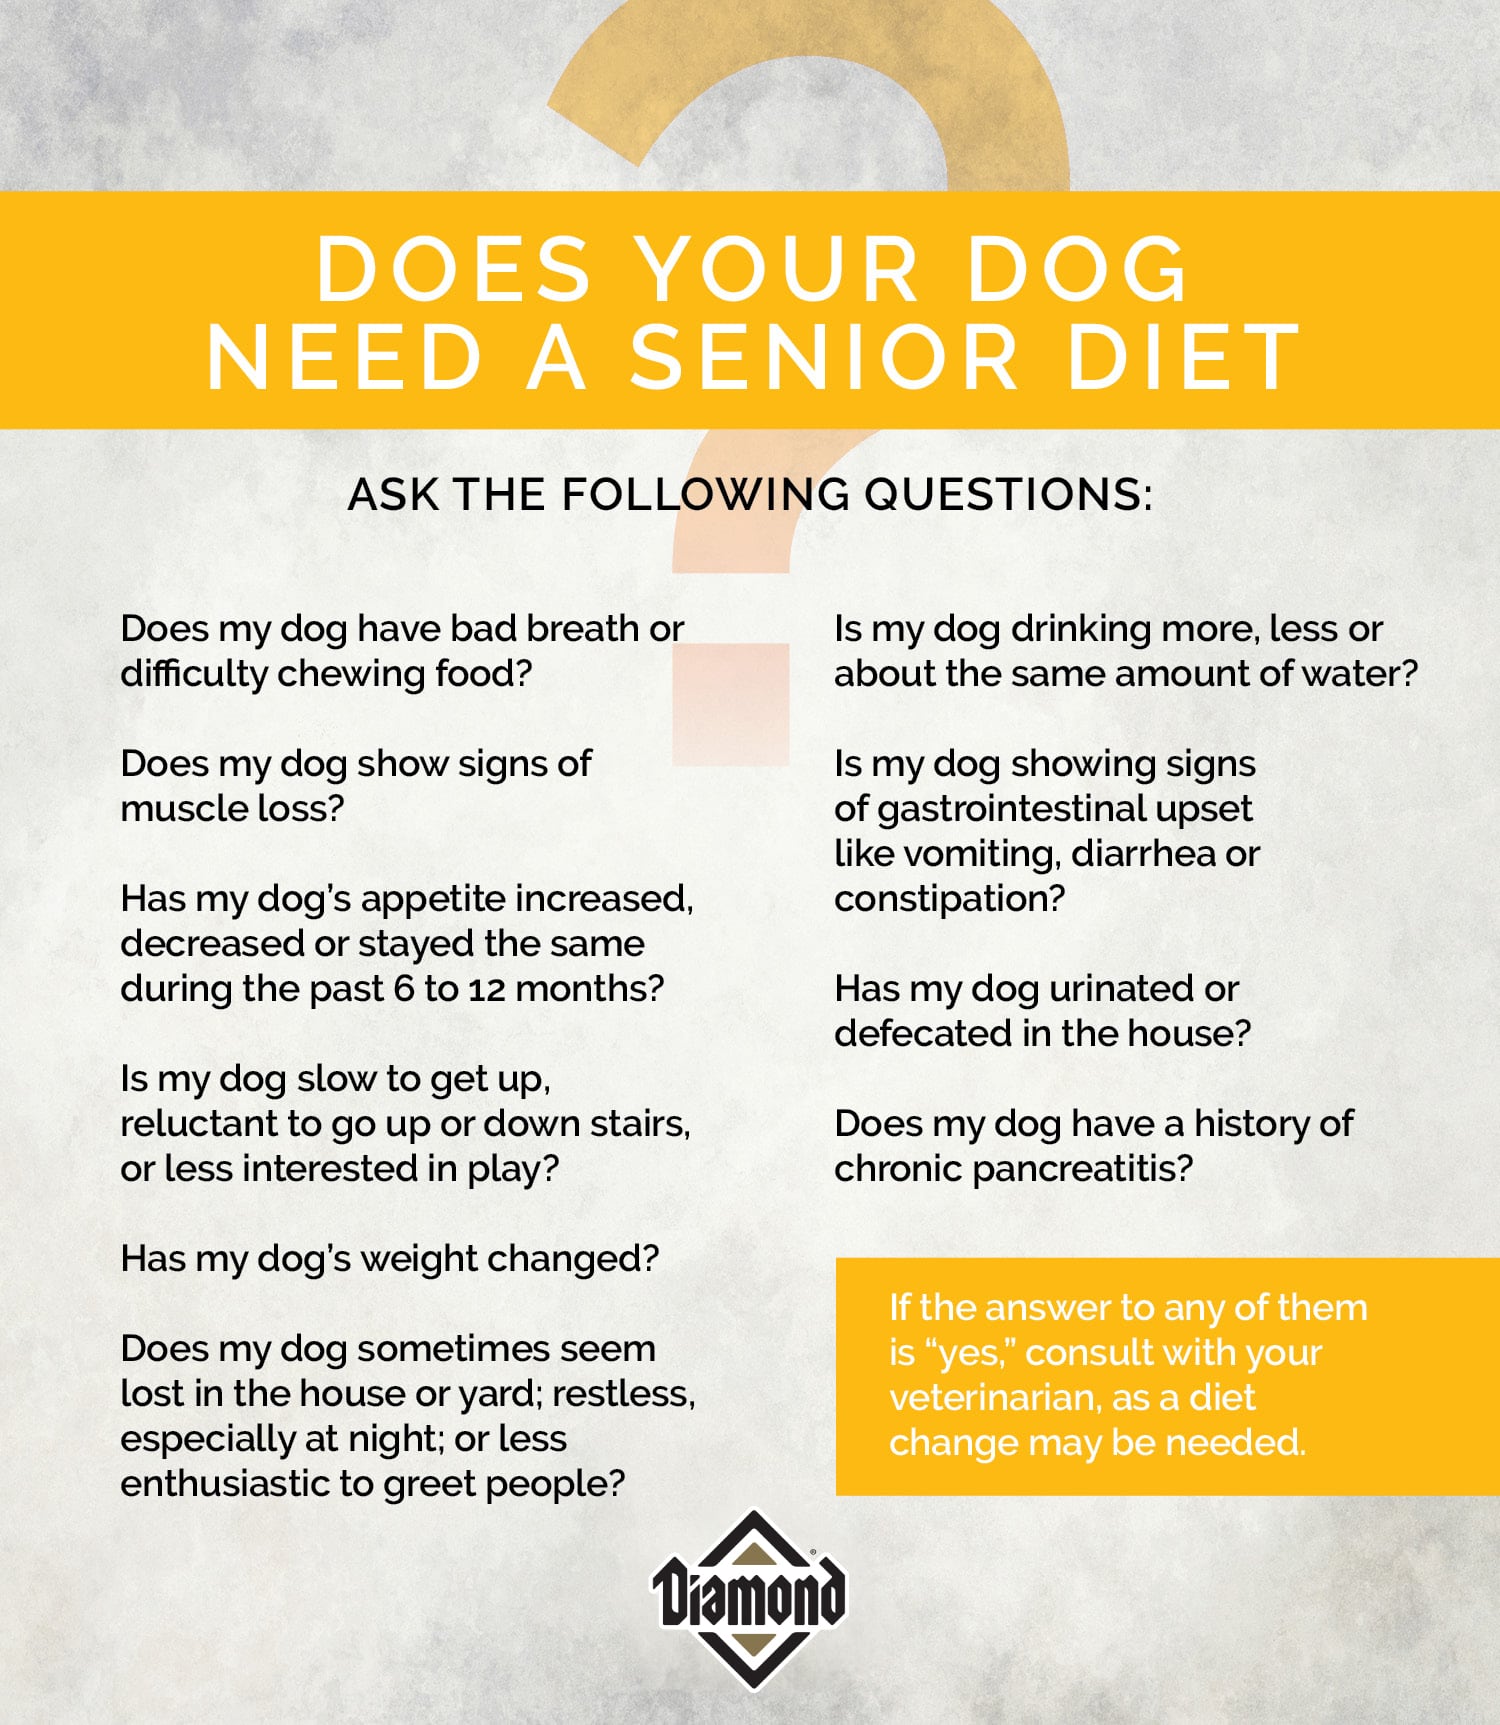 Does Your Dog Need a Senior Diet? | Diamond Pet Foods